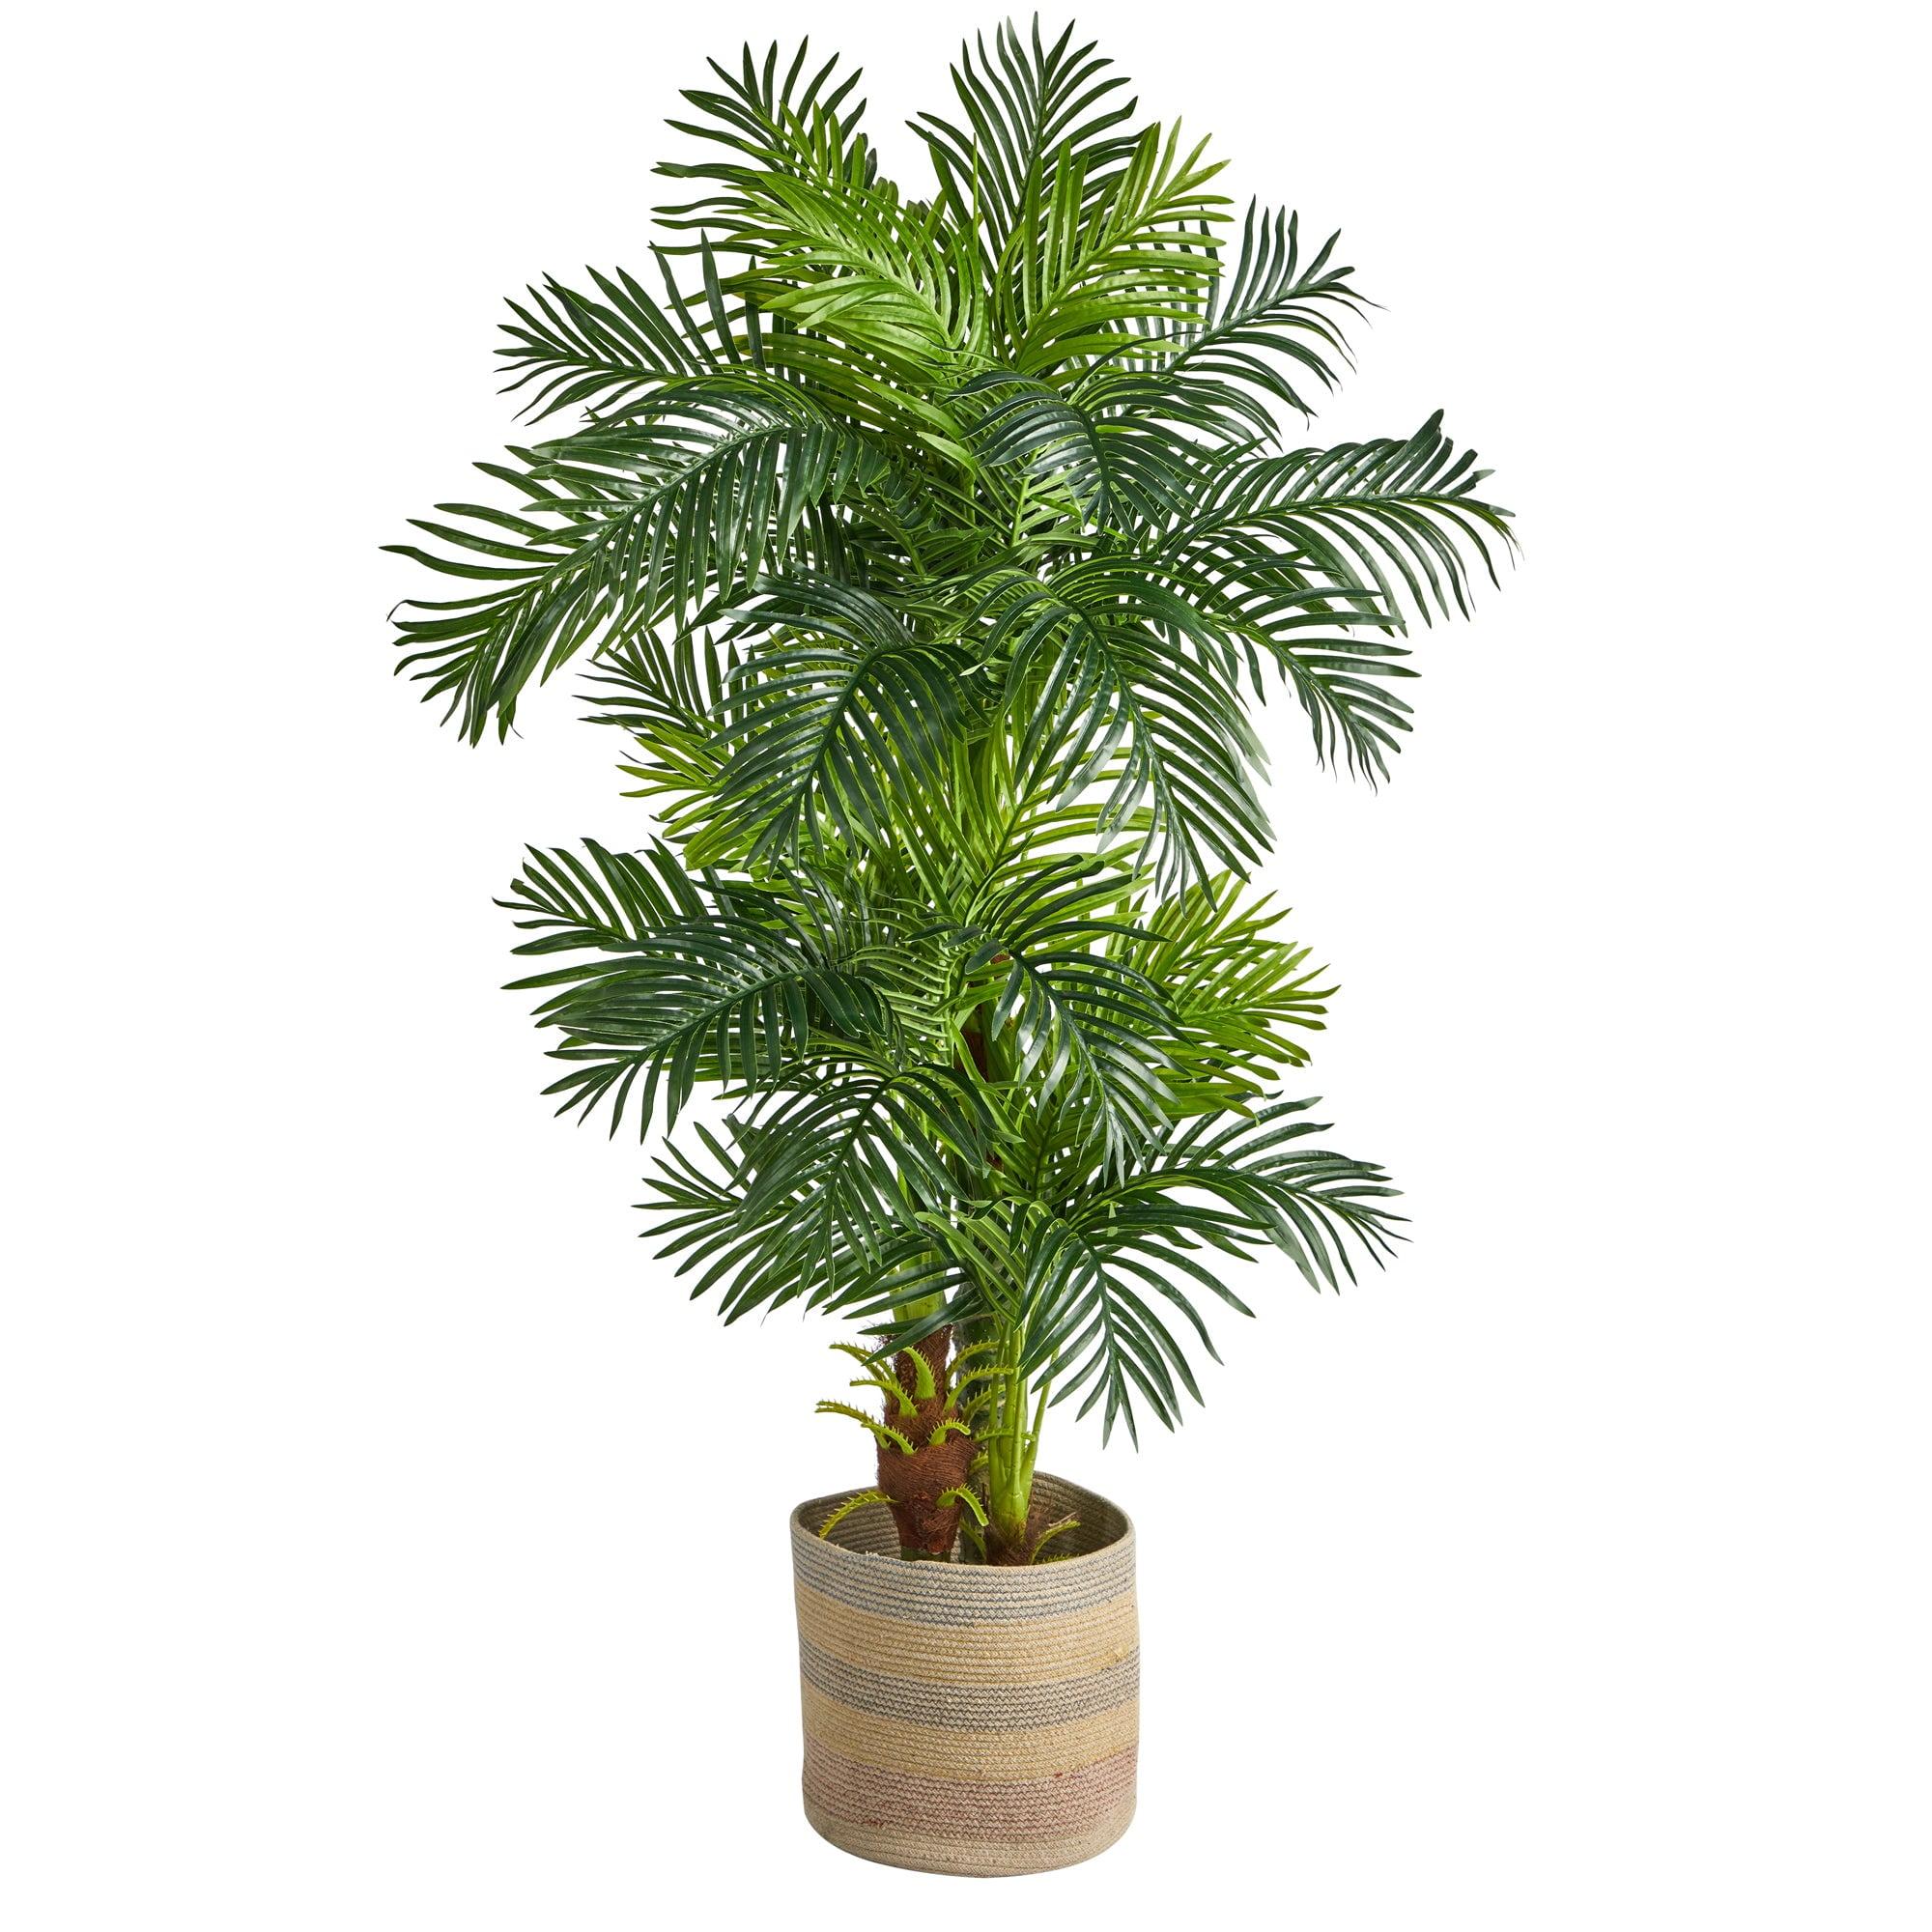 Tropical Paradise 6ft Hawaii Artificial Palm Tree with Multicolored Woven Cotton Planter